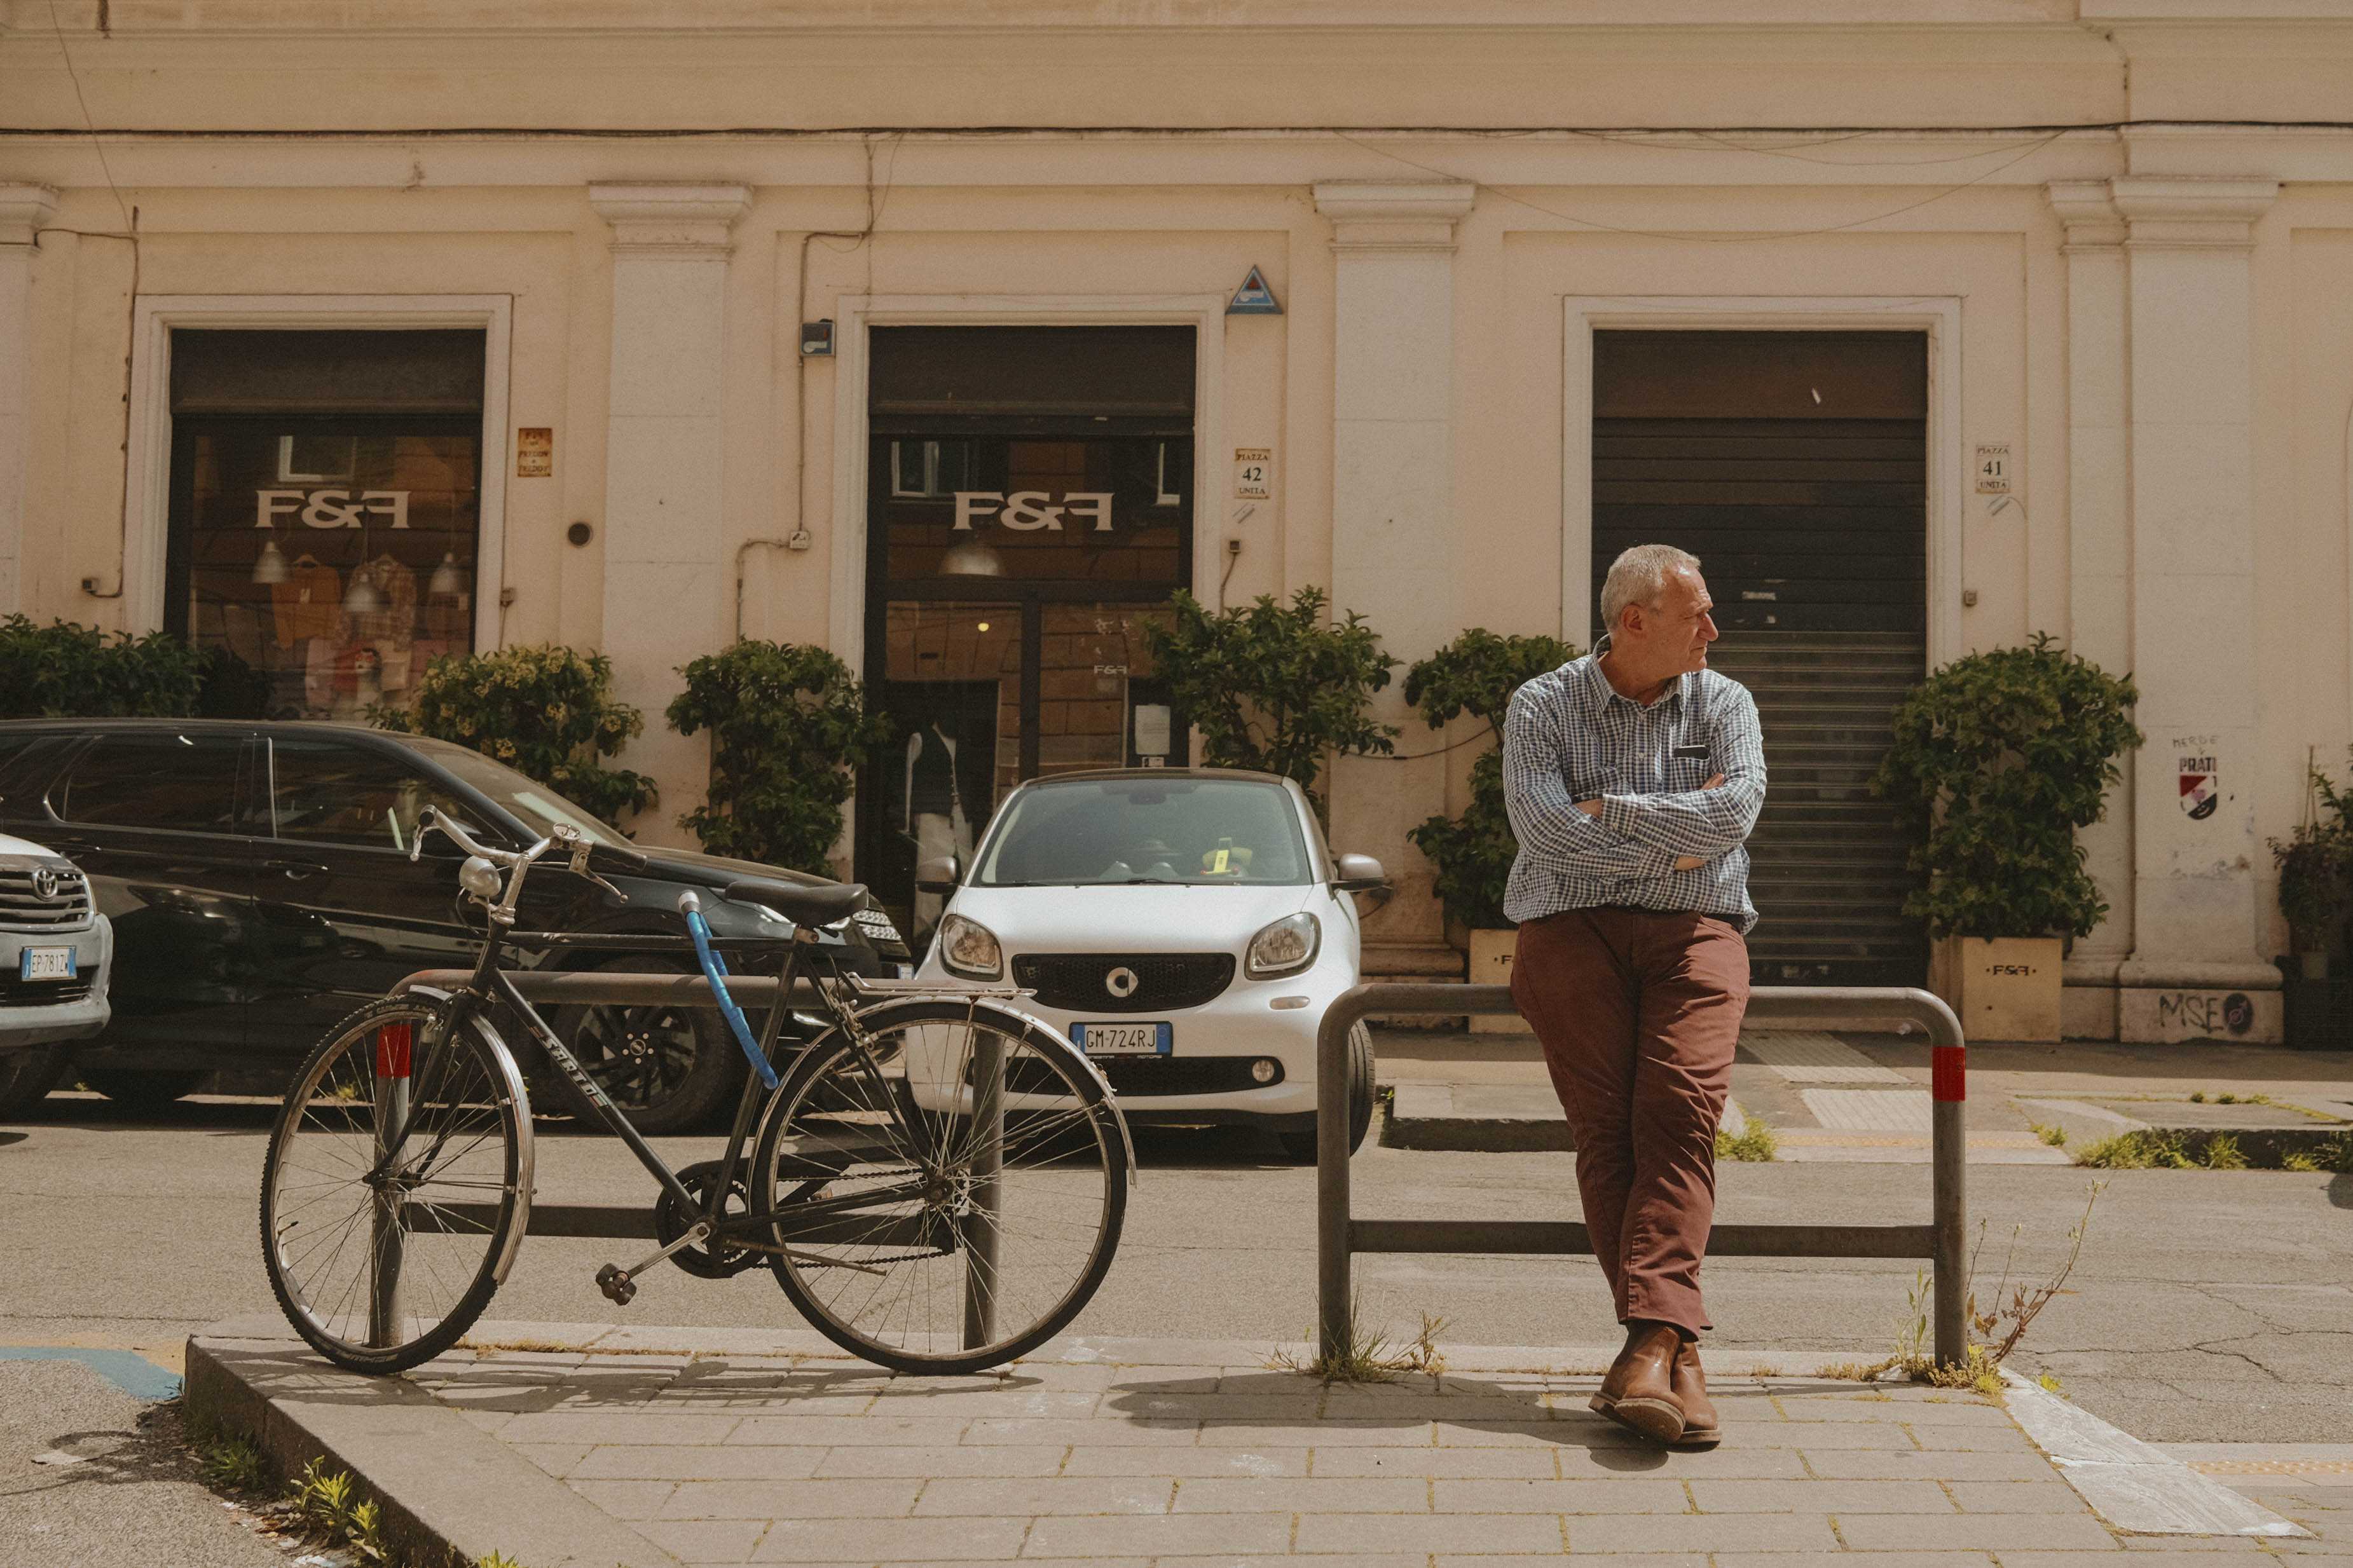 On the left, a bicycle. On the right, an older man leaning against a bike rake, looking in the opposite direction of the bike.